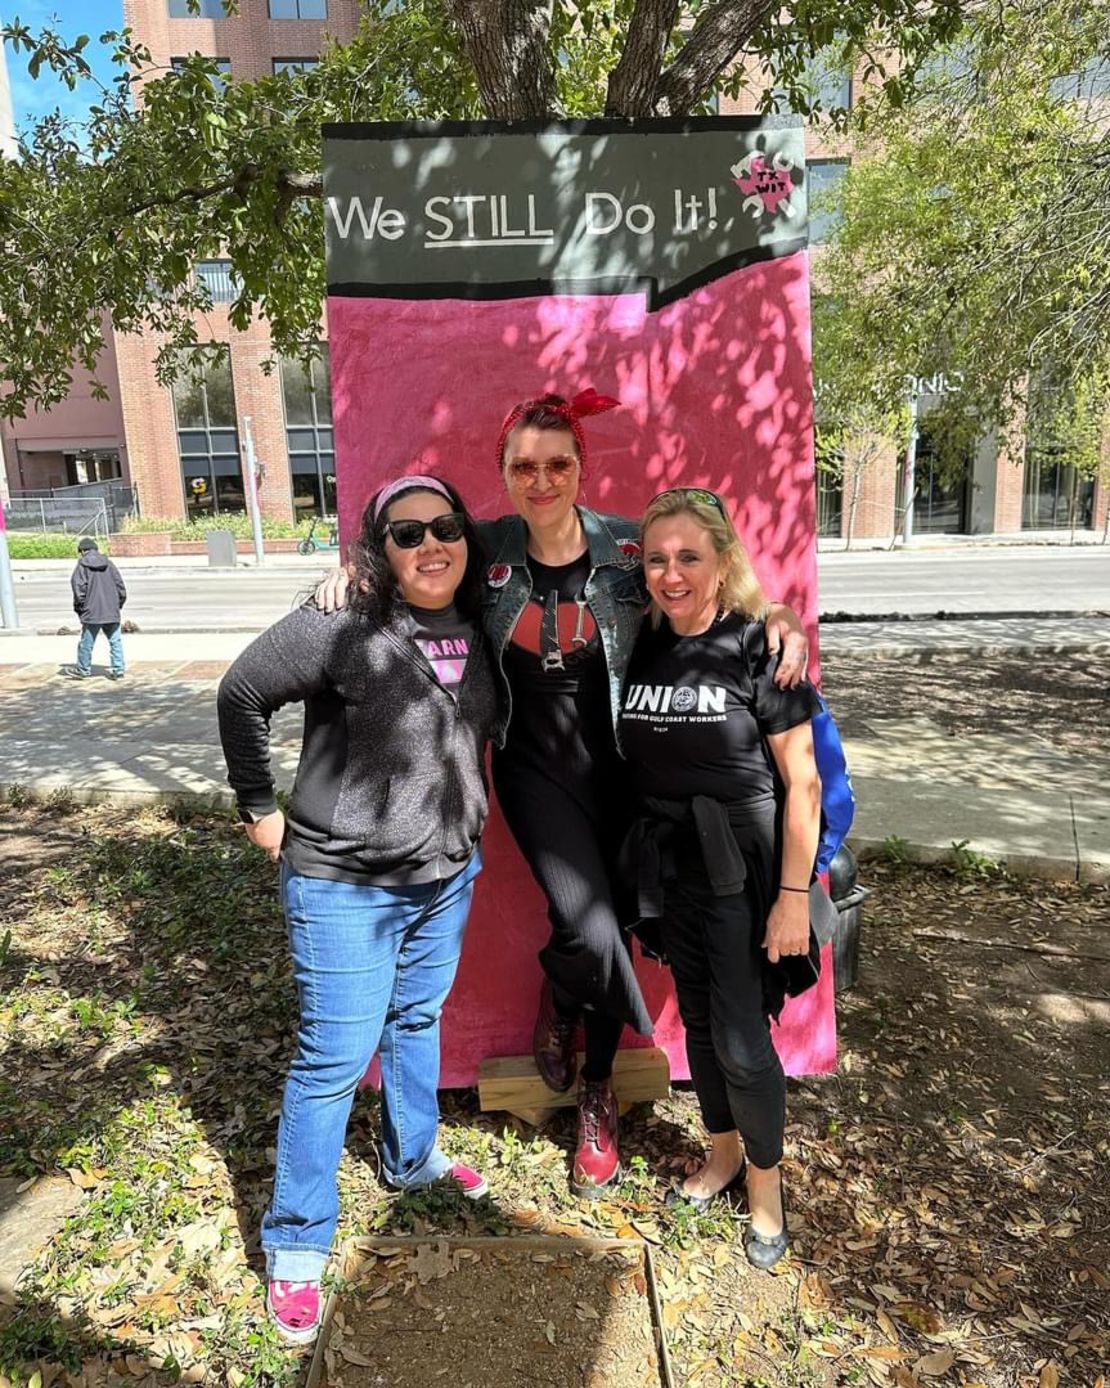 From left to right: Allie Perez, of Texas Women in Trades; Blythe Zemel, founder of Girl with Grit; and Ginny Stogner McDavid, president of the Harris County AFL-CIO, at the second annual Women In Construction parade and rally on March 9, 2024, in downtown San Antonio.